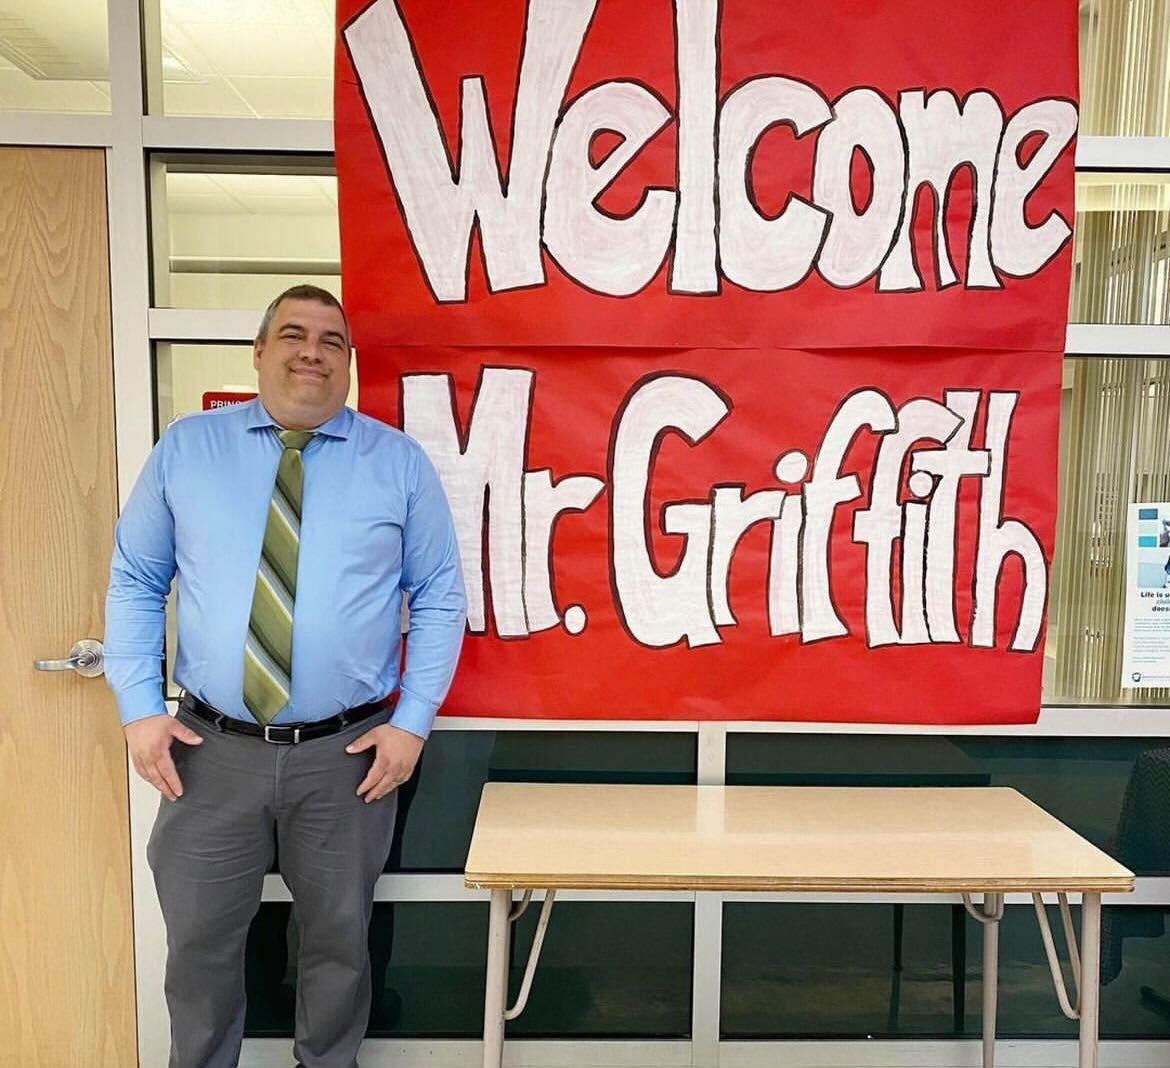 Mr. Griffith, now middle school principal,   is welcomed with a sign from the students.